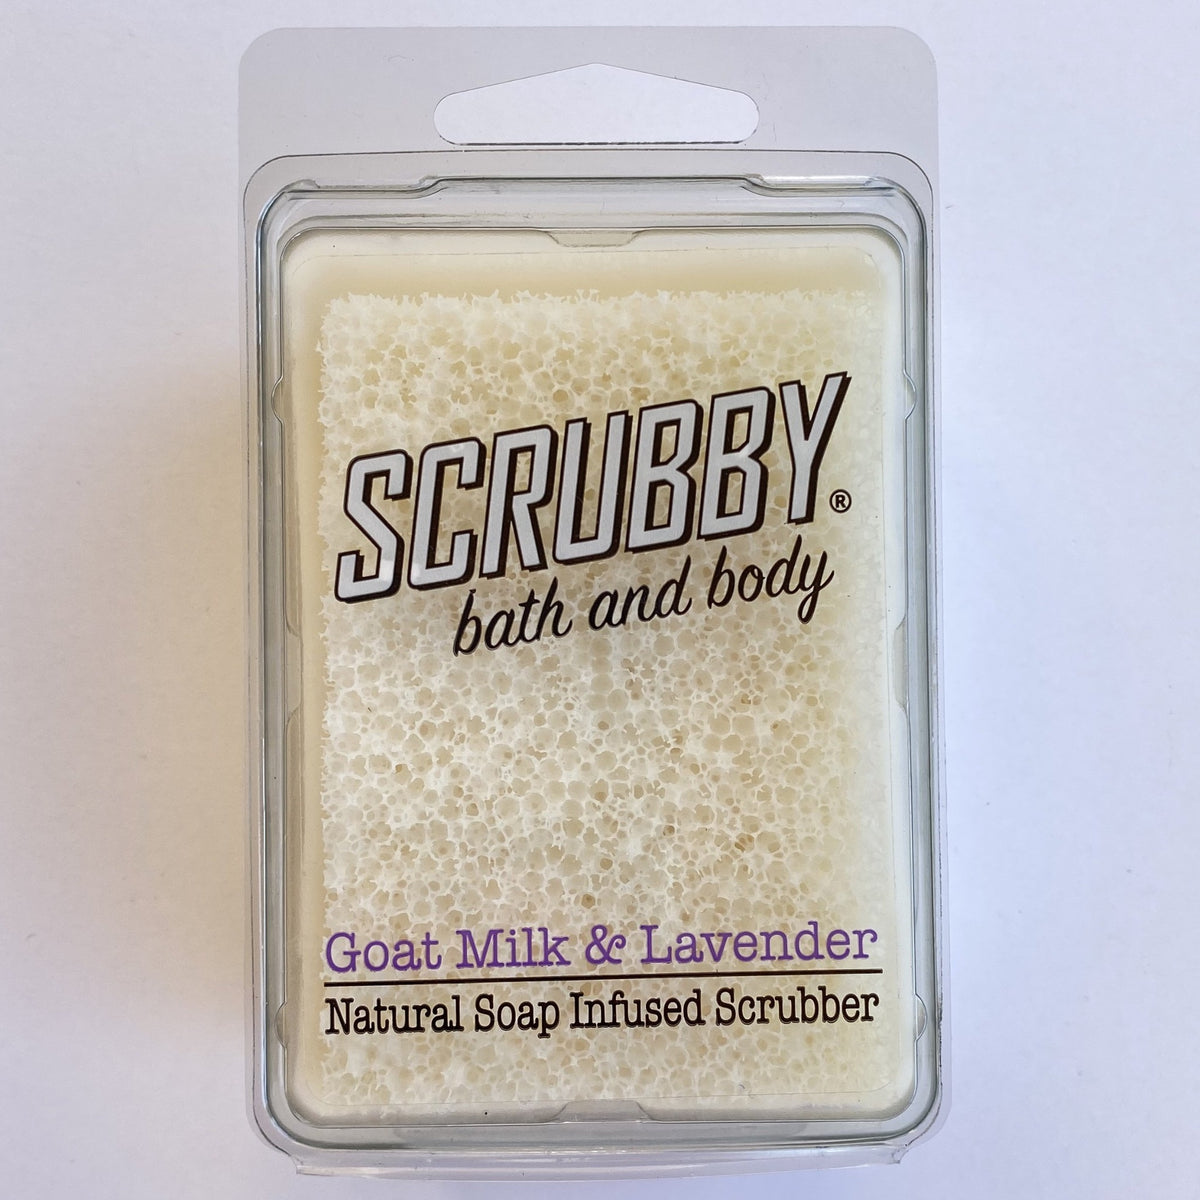 Scrubby Soap Goat Milk and Lavender